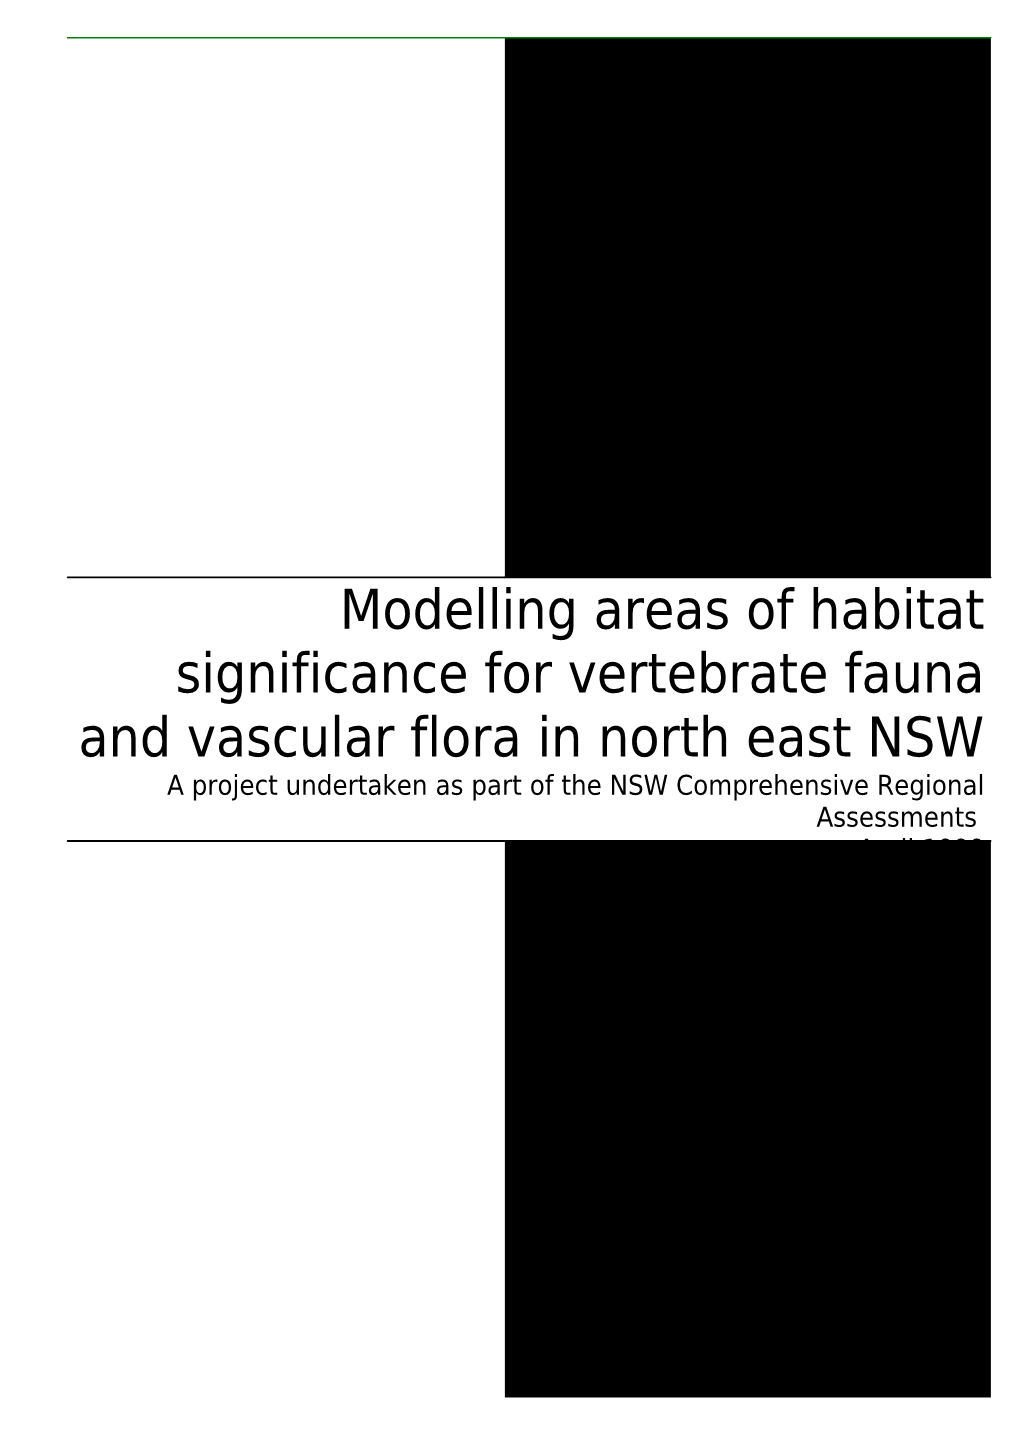 Modelling Areas of Habitat Significance for Vertebrate Fauna and Vascular Flora in North-East